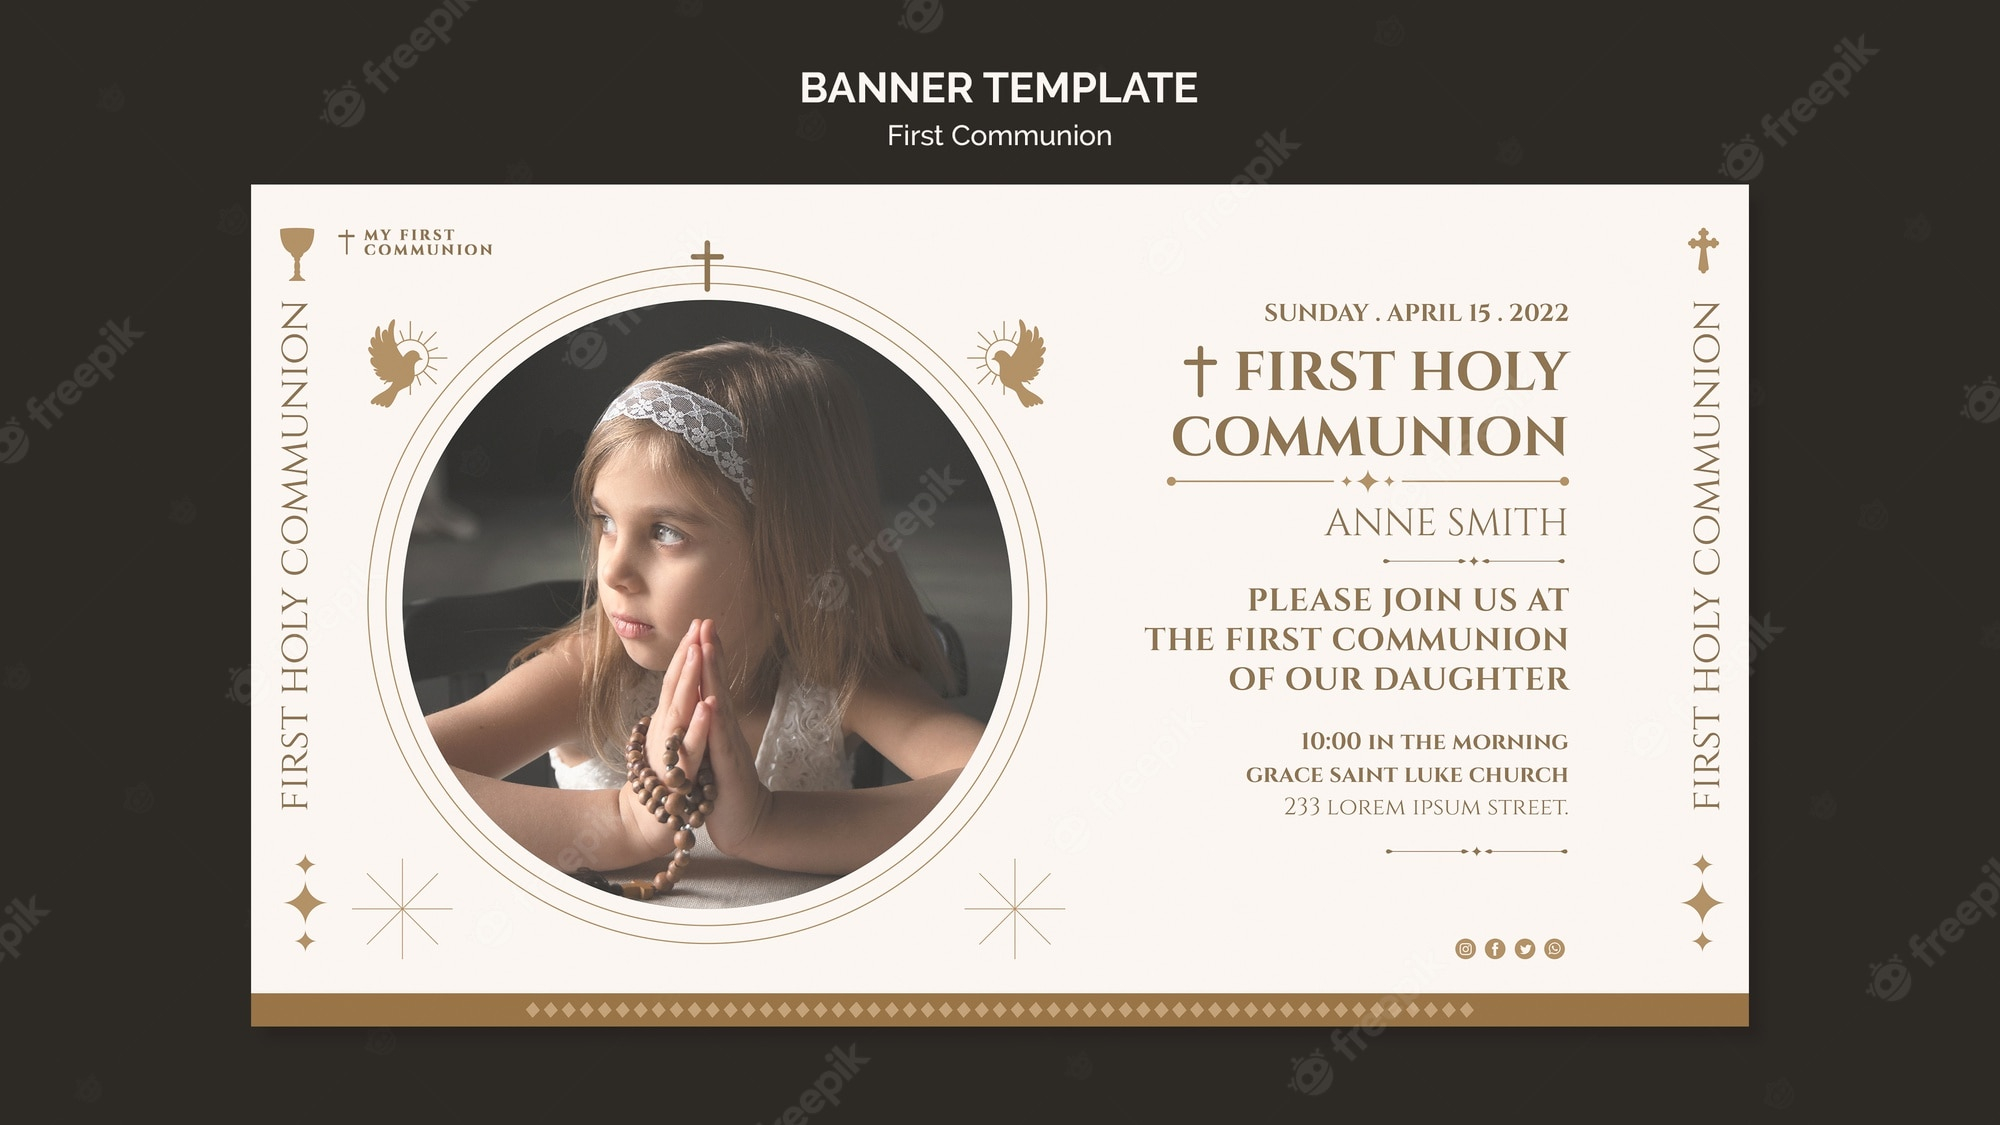 First communion banner templates free